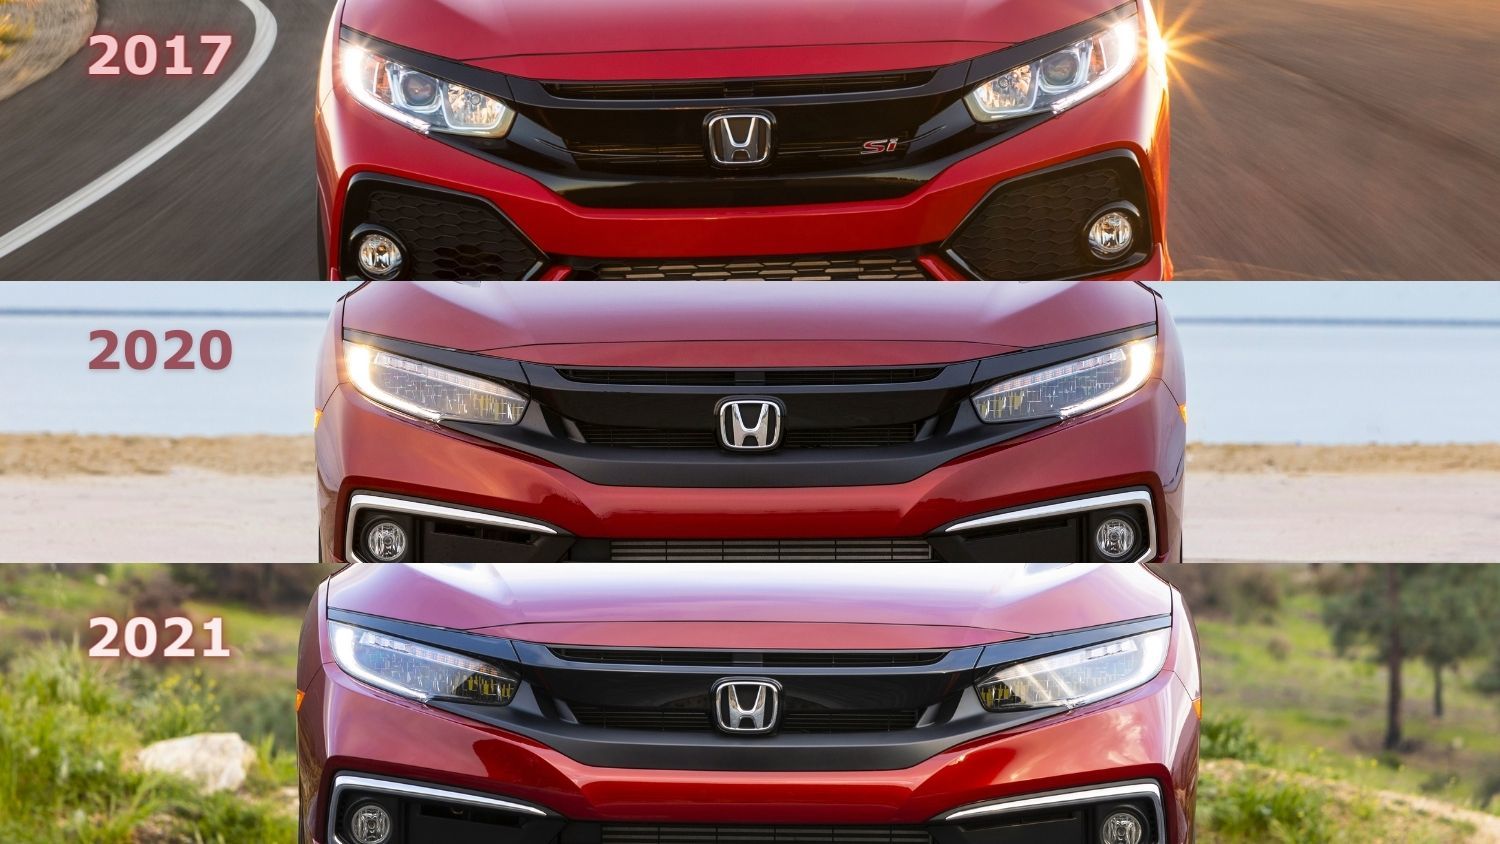 The three grilles of the winning Honda Civic in 2017, 2020 and 2021